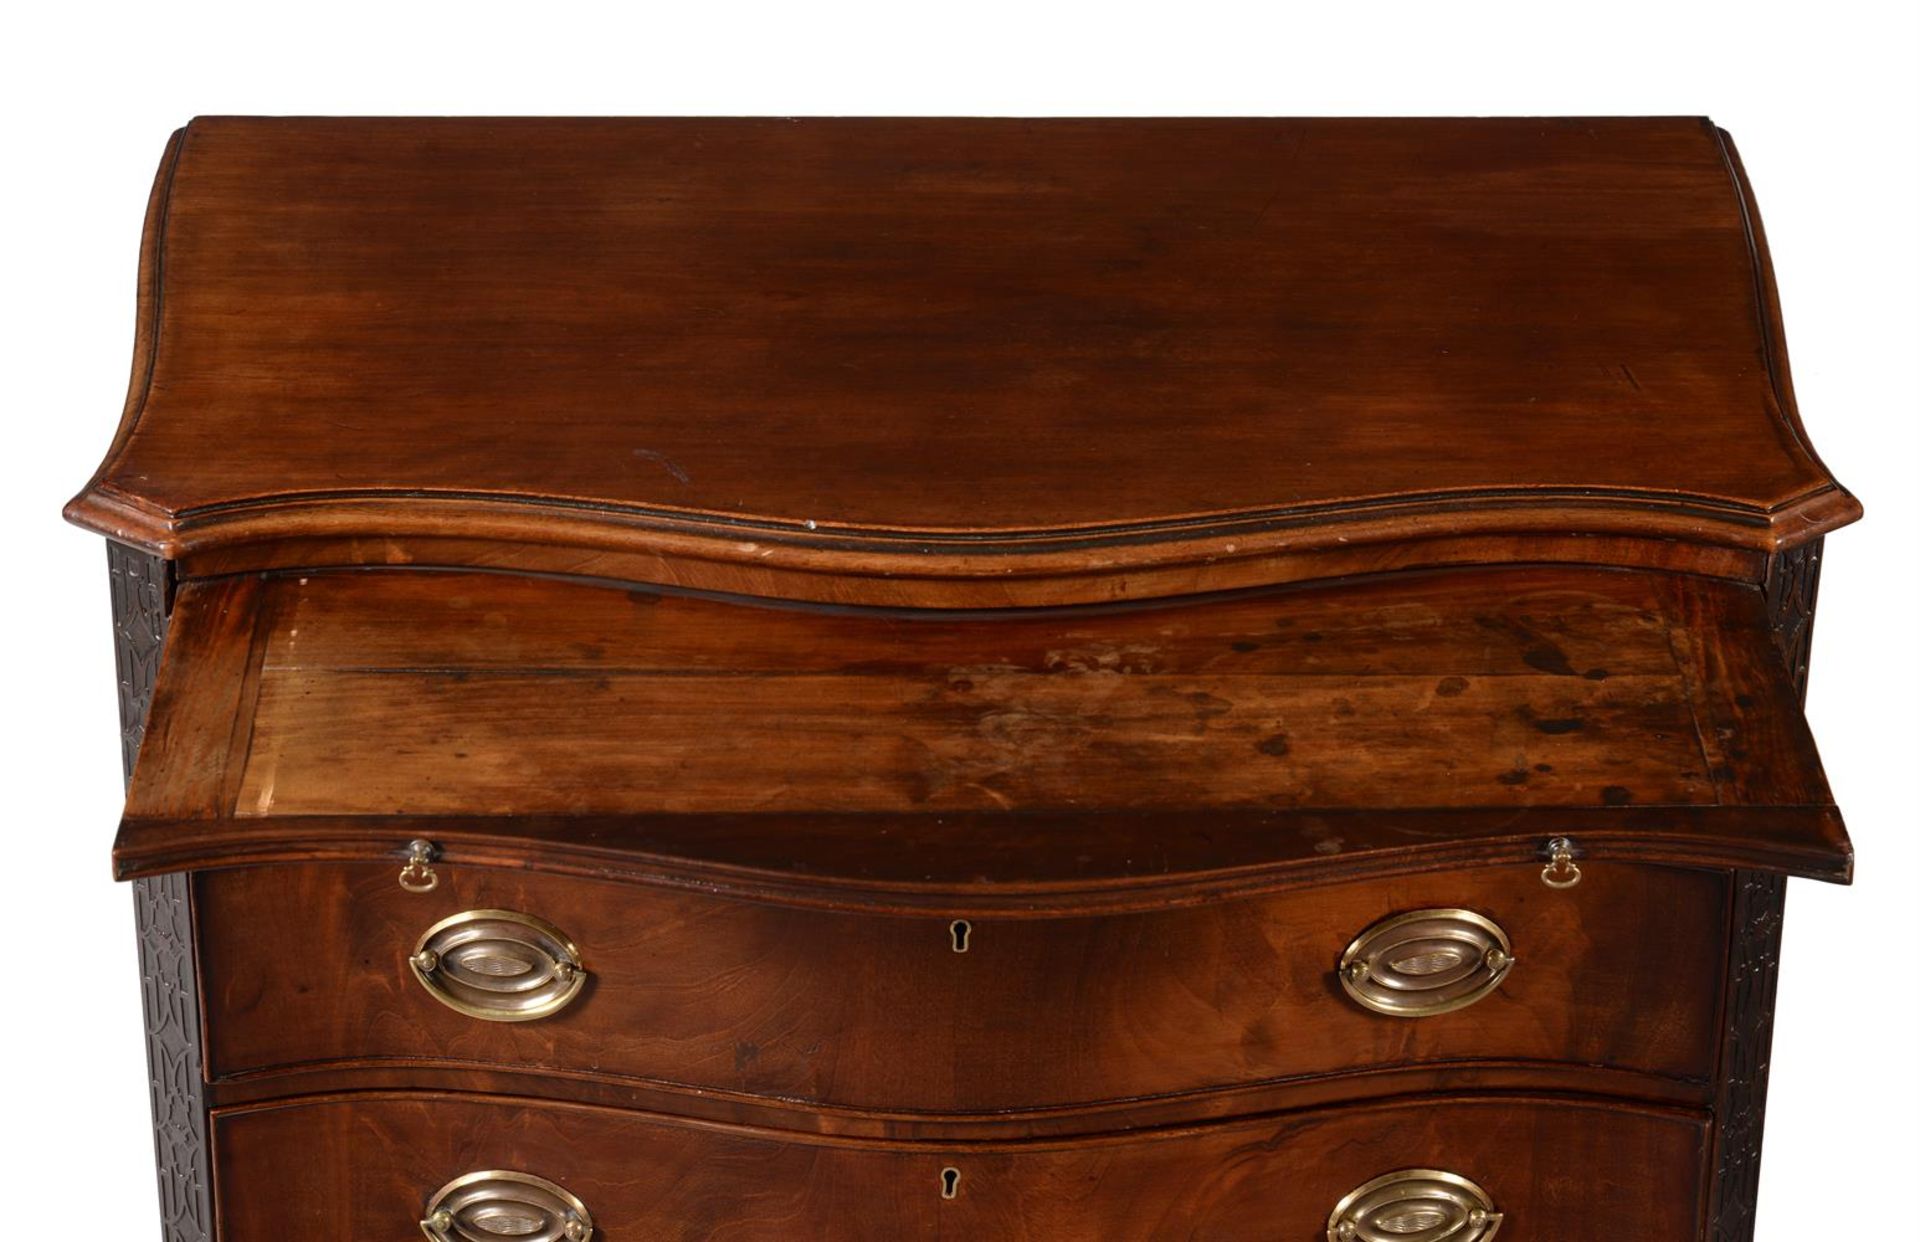 A GEORGE III MAHOGANY SERPENTINE FRONTED BACHELOR'S CHEST OF DRAWERS, CIRCA 1770 - Image 4 of 6